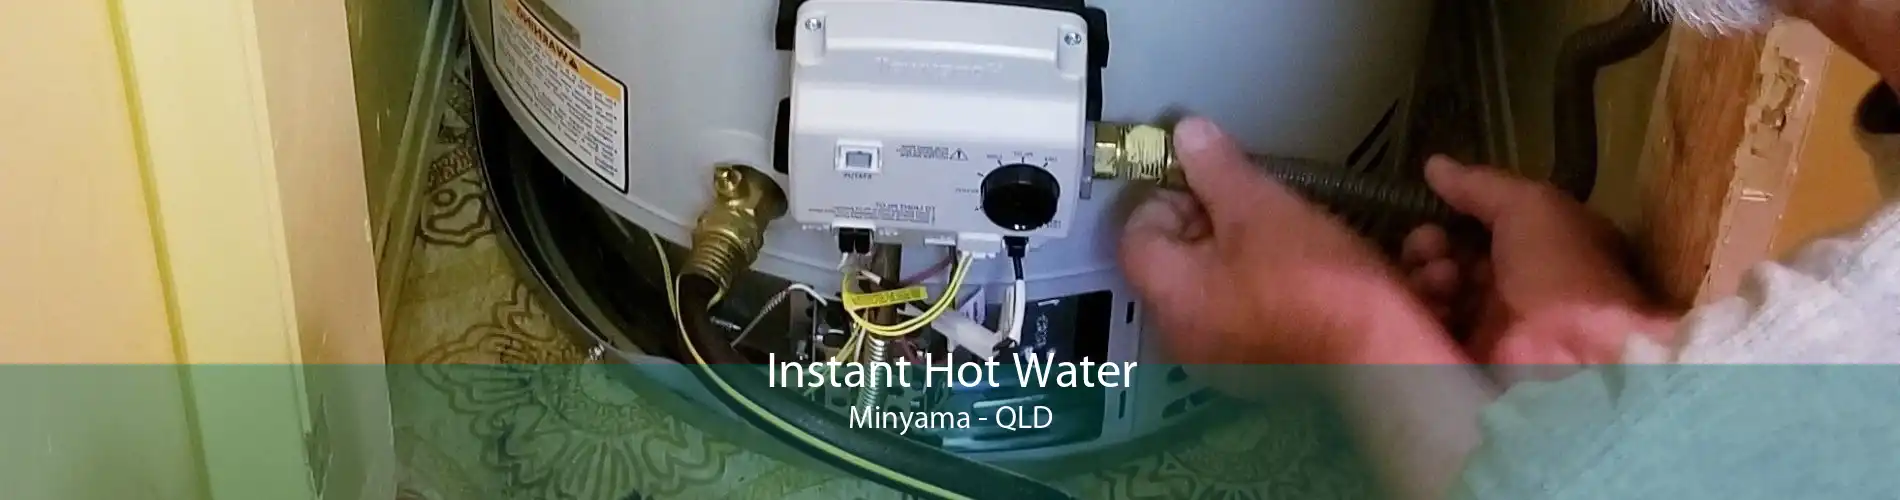 Instant Hot Water Minyama - QLD